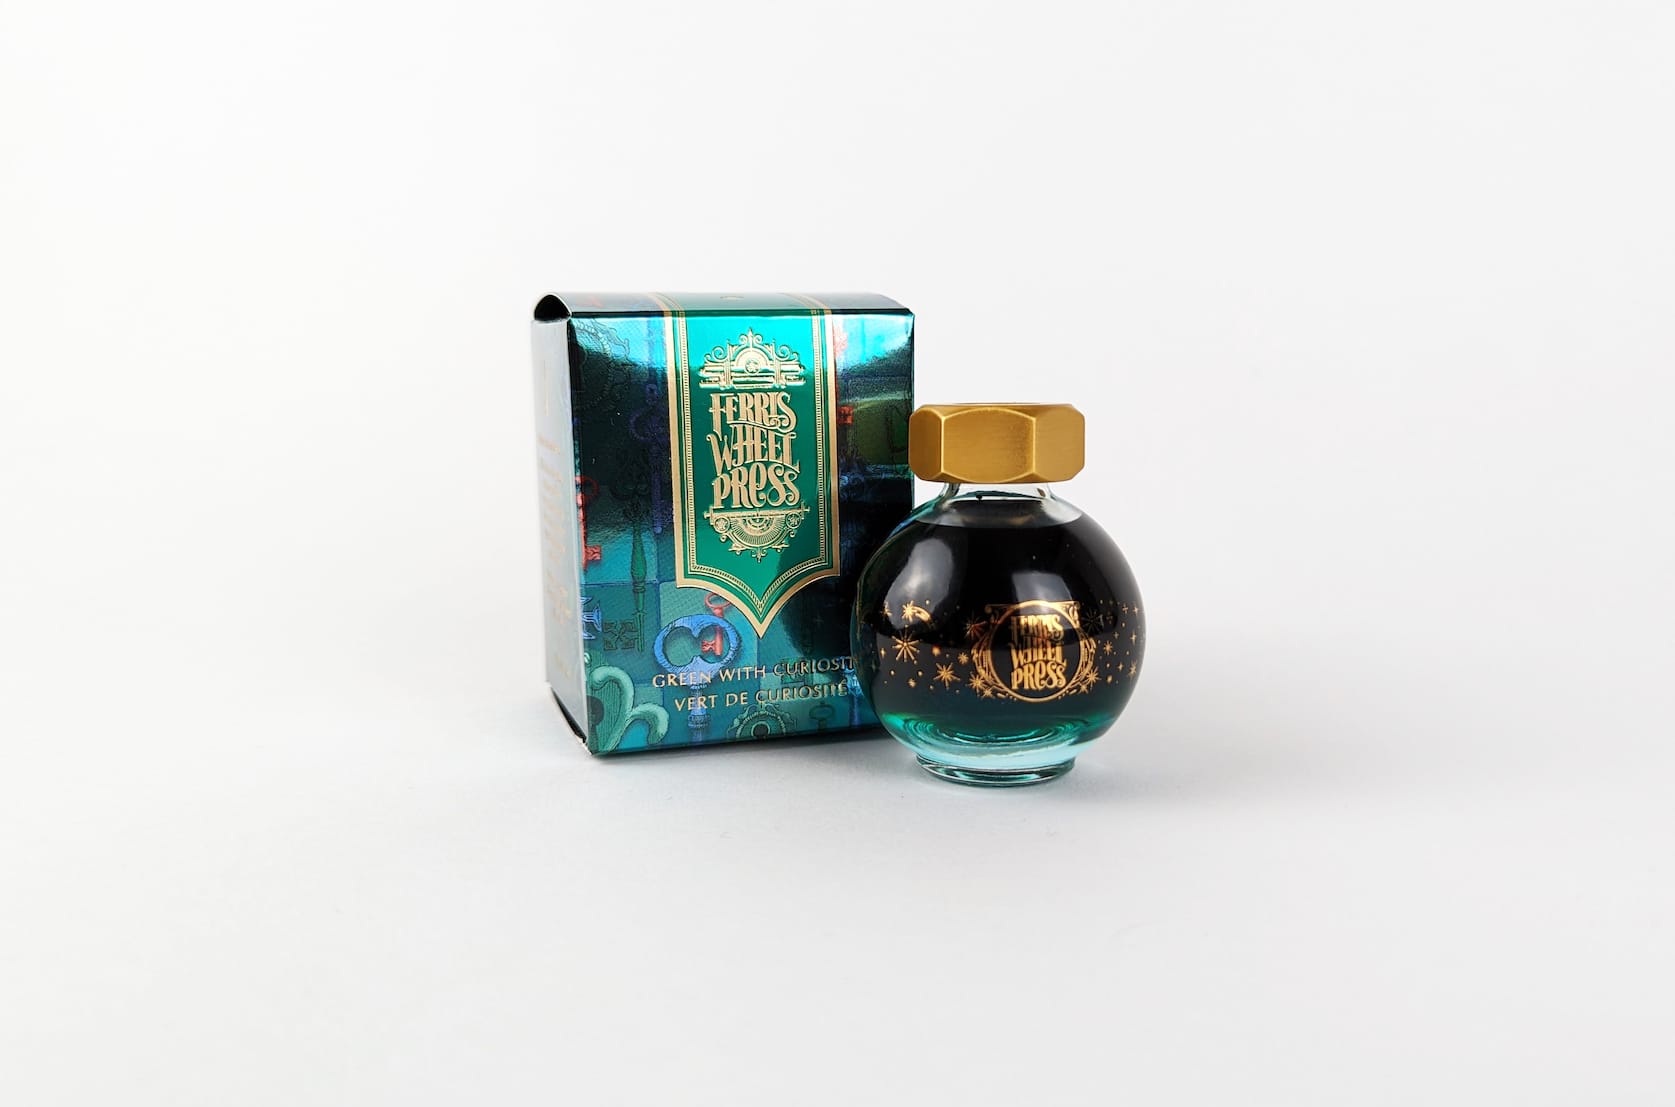 An ornate green, blue, and red cardboard box with gold text that reads Ferris Wheel Press: Green with Curiosity. Vert de Curiosité. Beside the box there is a round glass bottle of ink with a gold lid. On the bottle there is a small gold illustration featuring stars and sparkles.